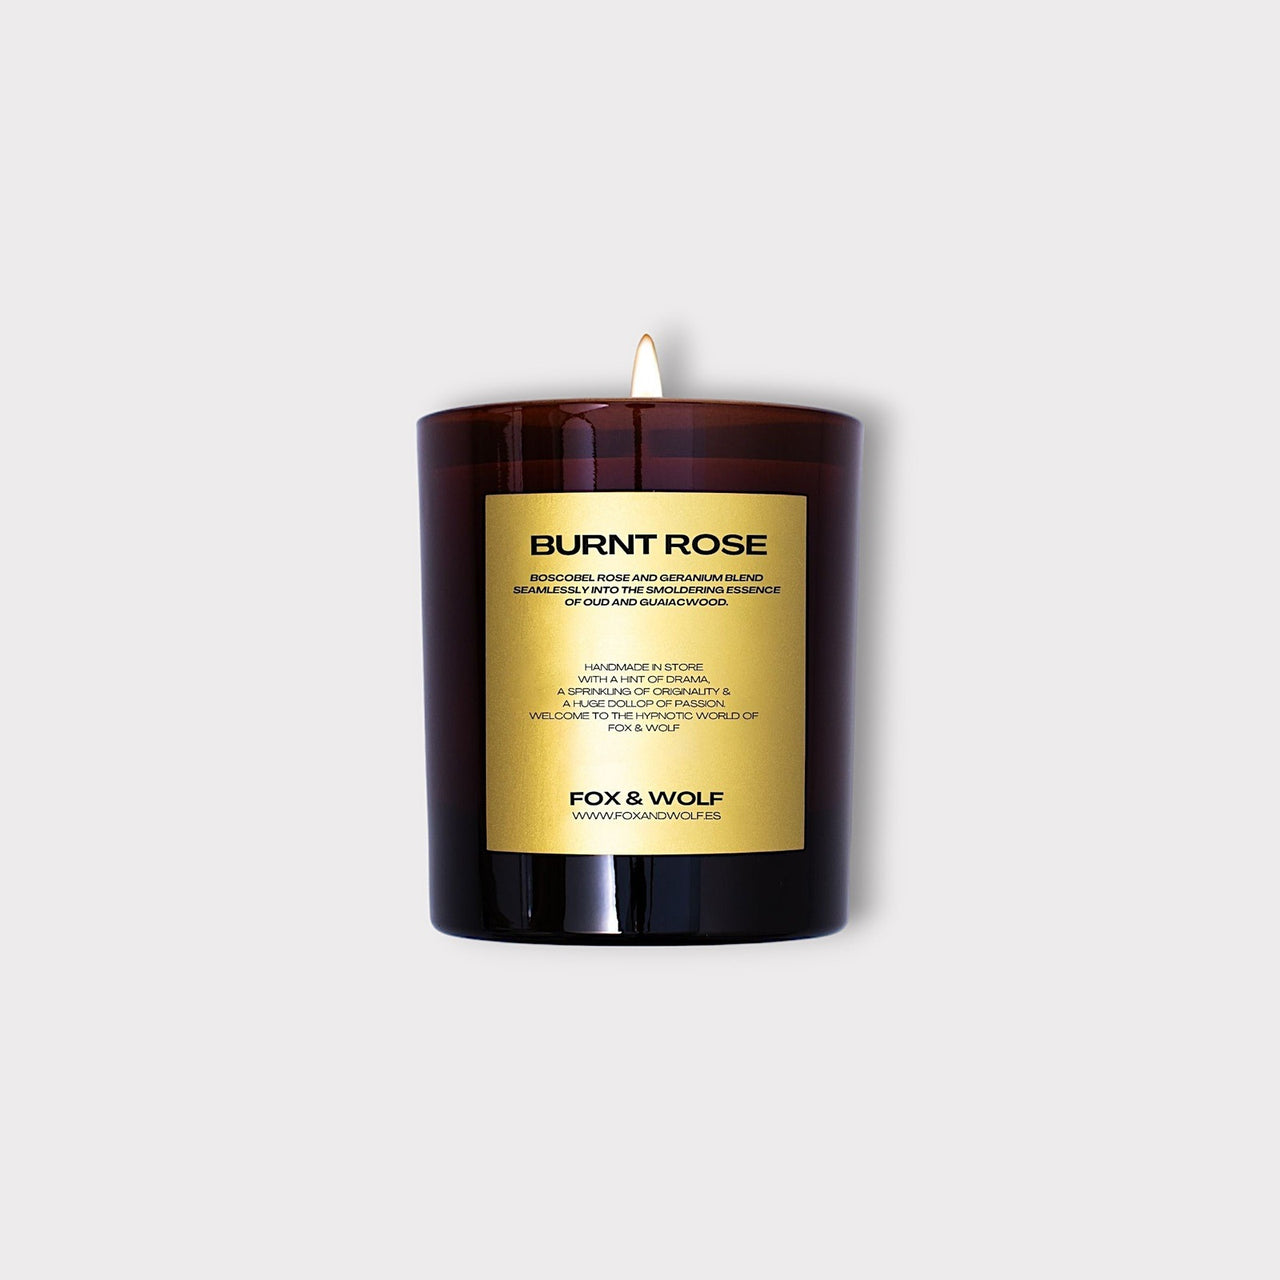 (300 G) BURNT ROSE SCENTED CANDLE